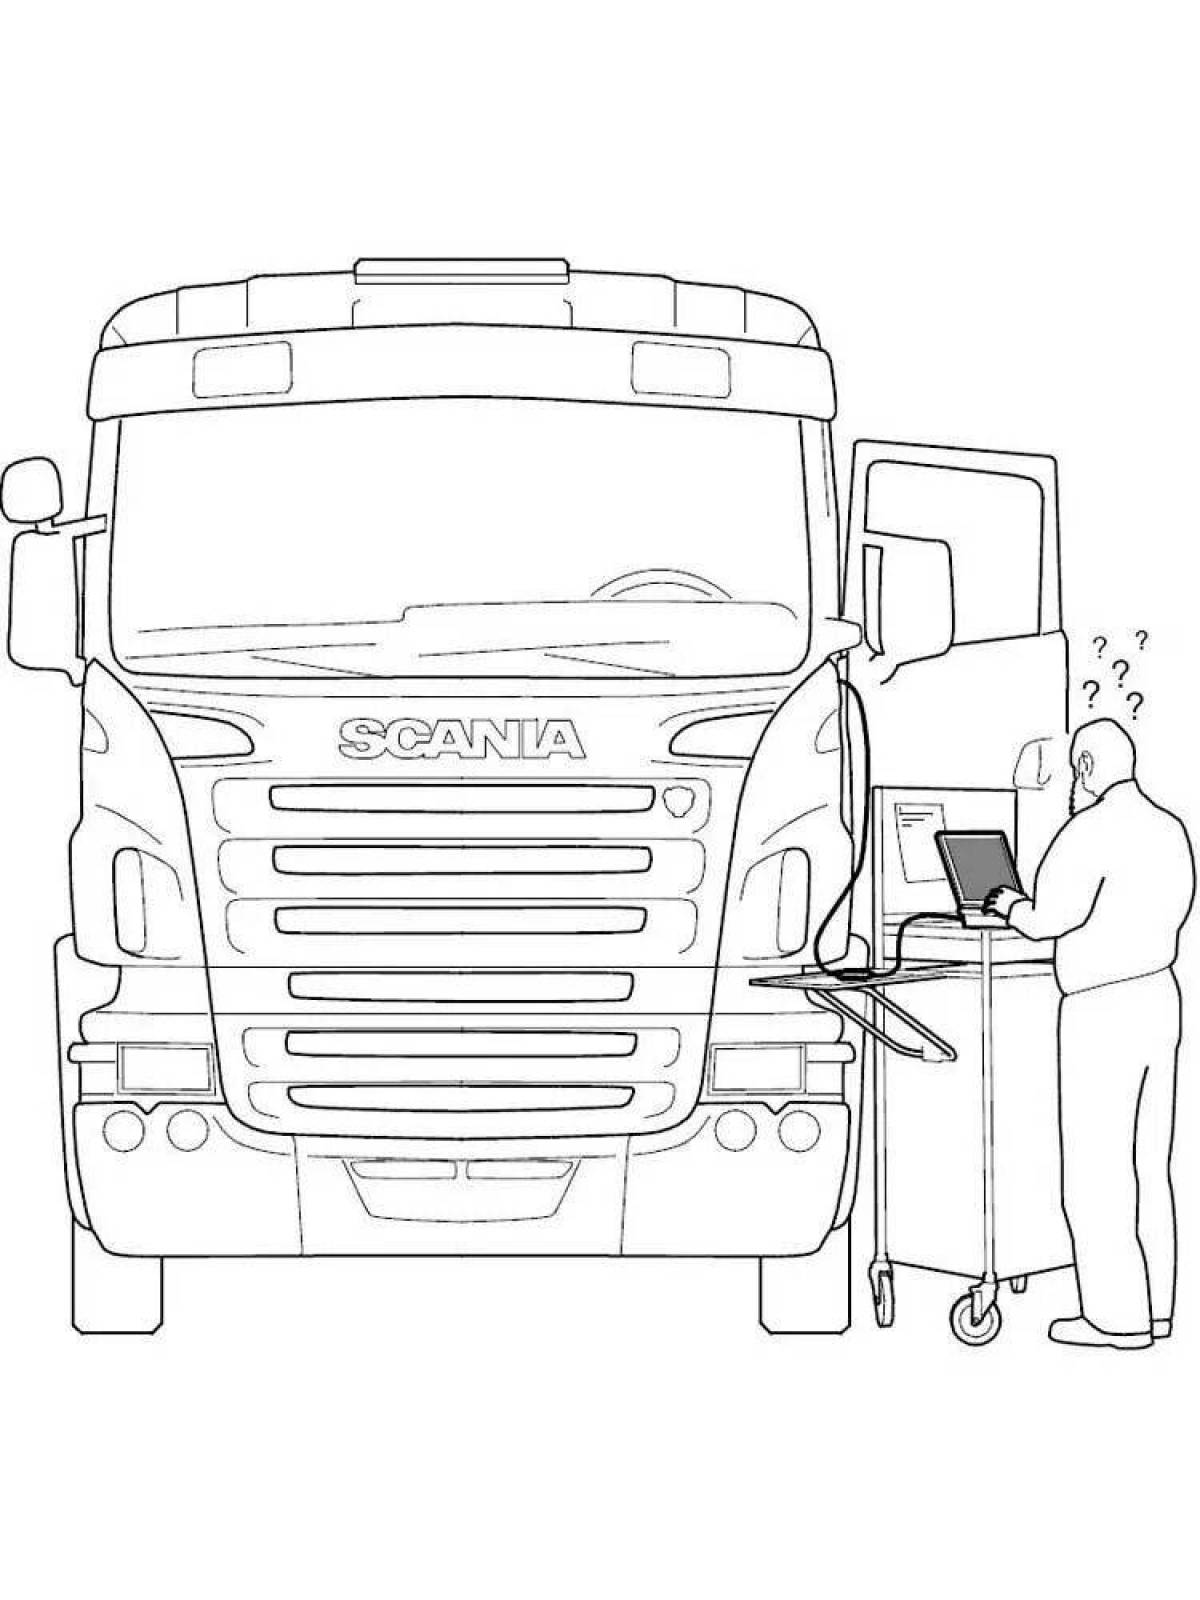 Exciting trucker coloring pages